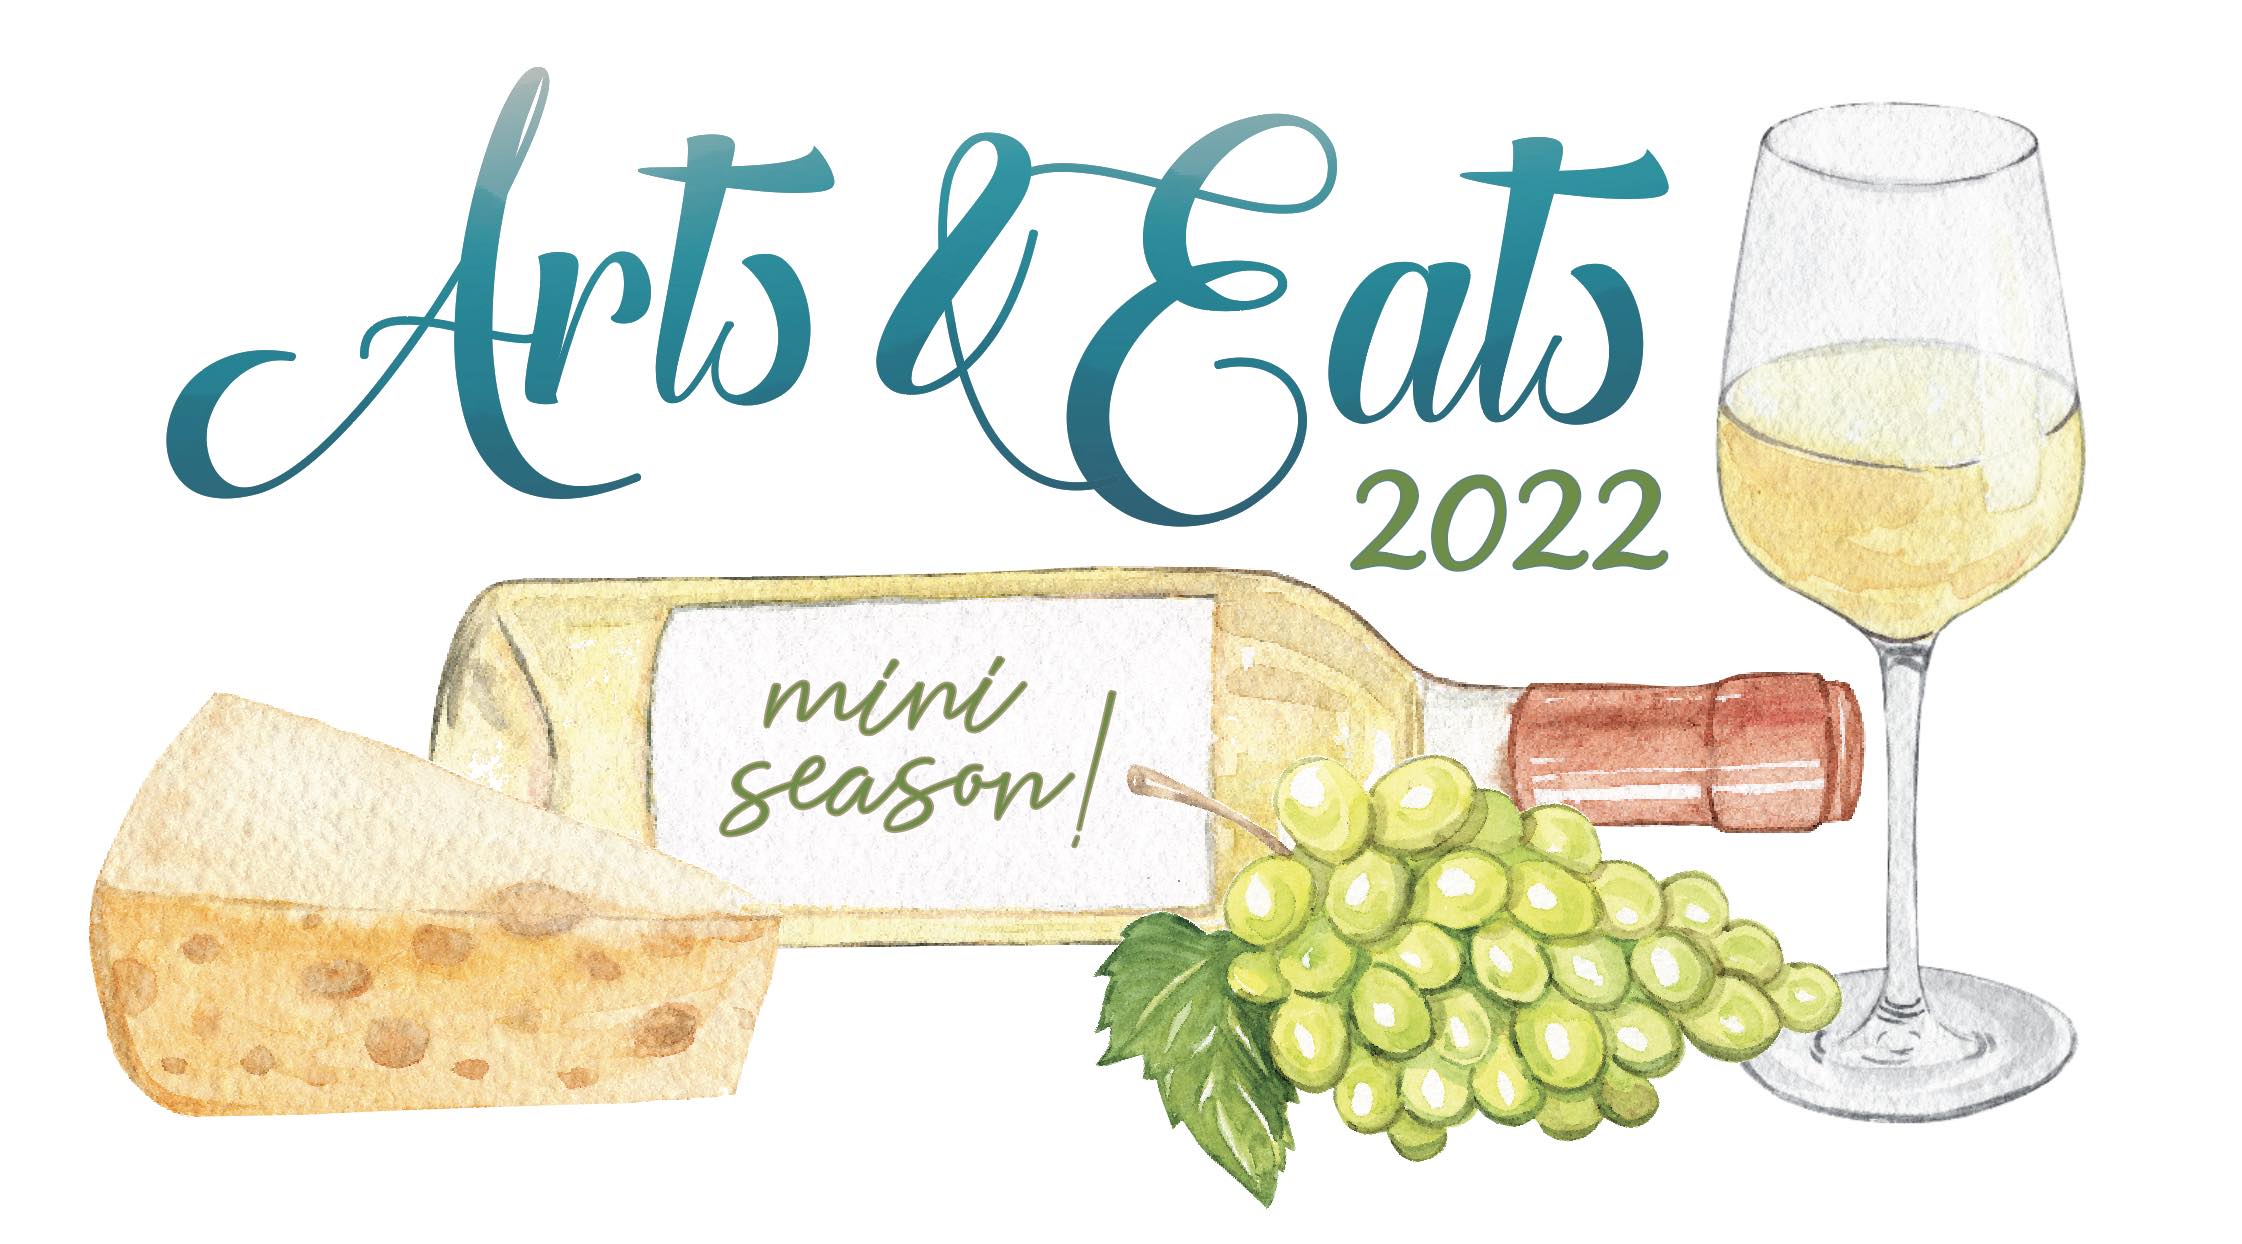 Watercolor graphic of a wine glass, wine bottle, cheese and green grapes with "Arts & Eats 2022" written above in script font